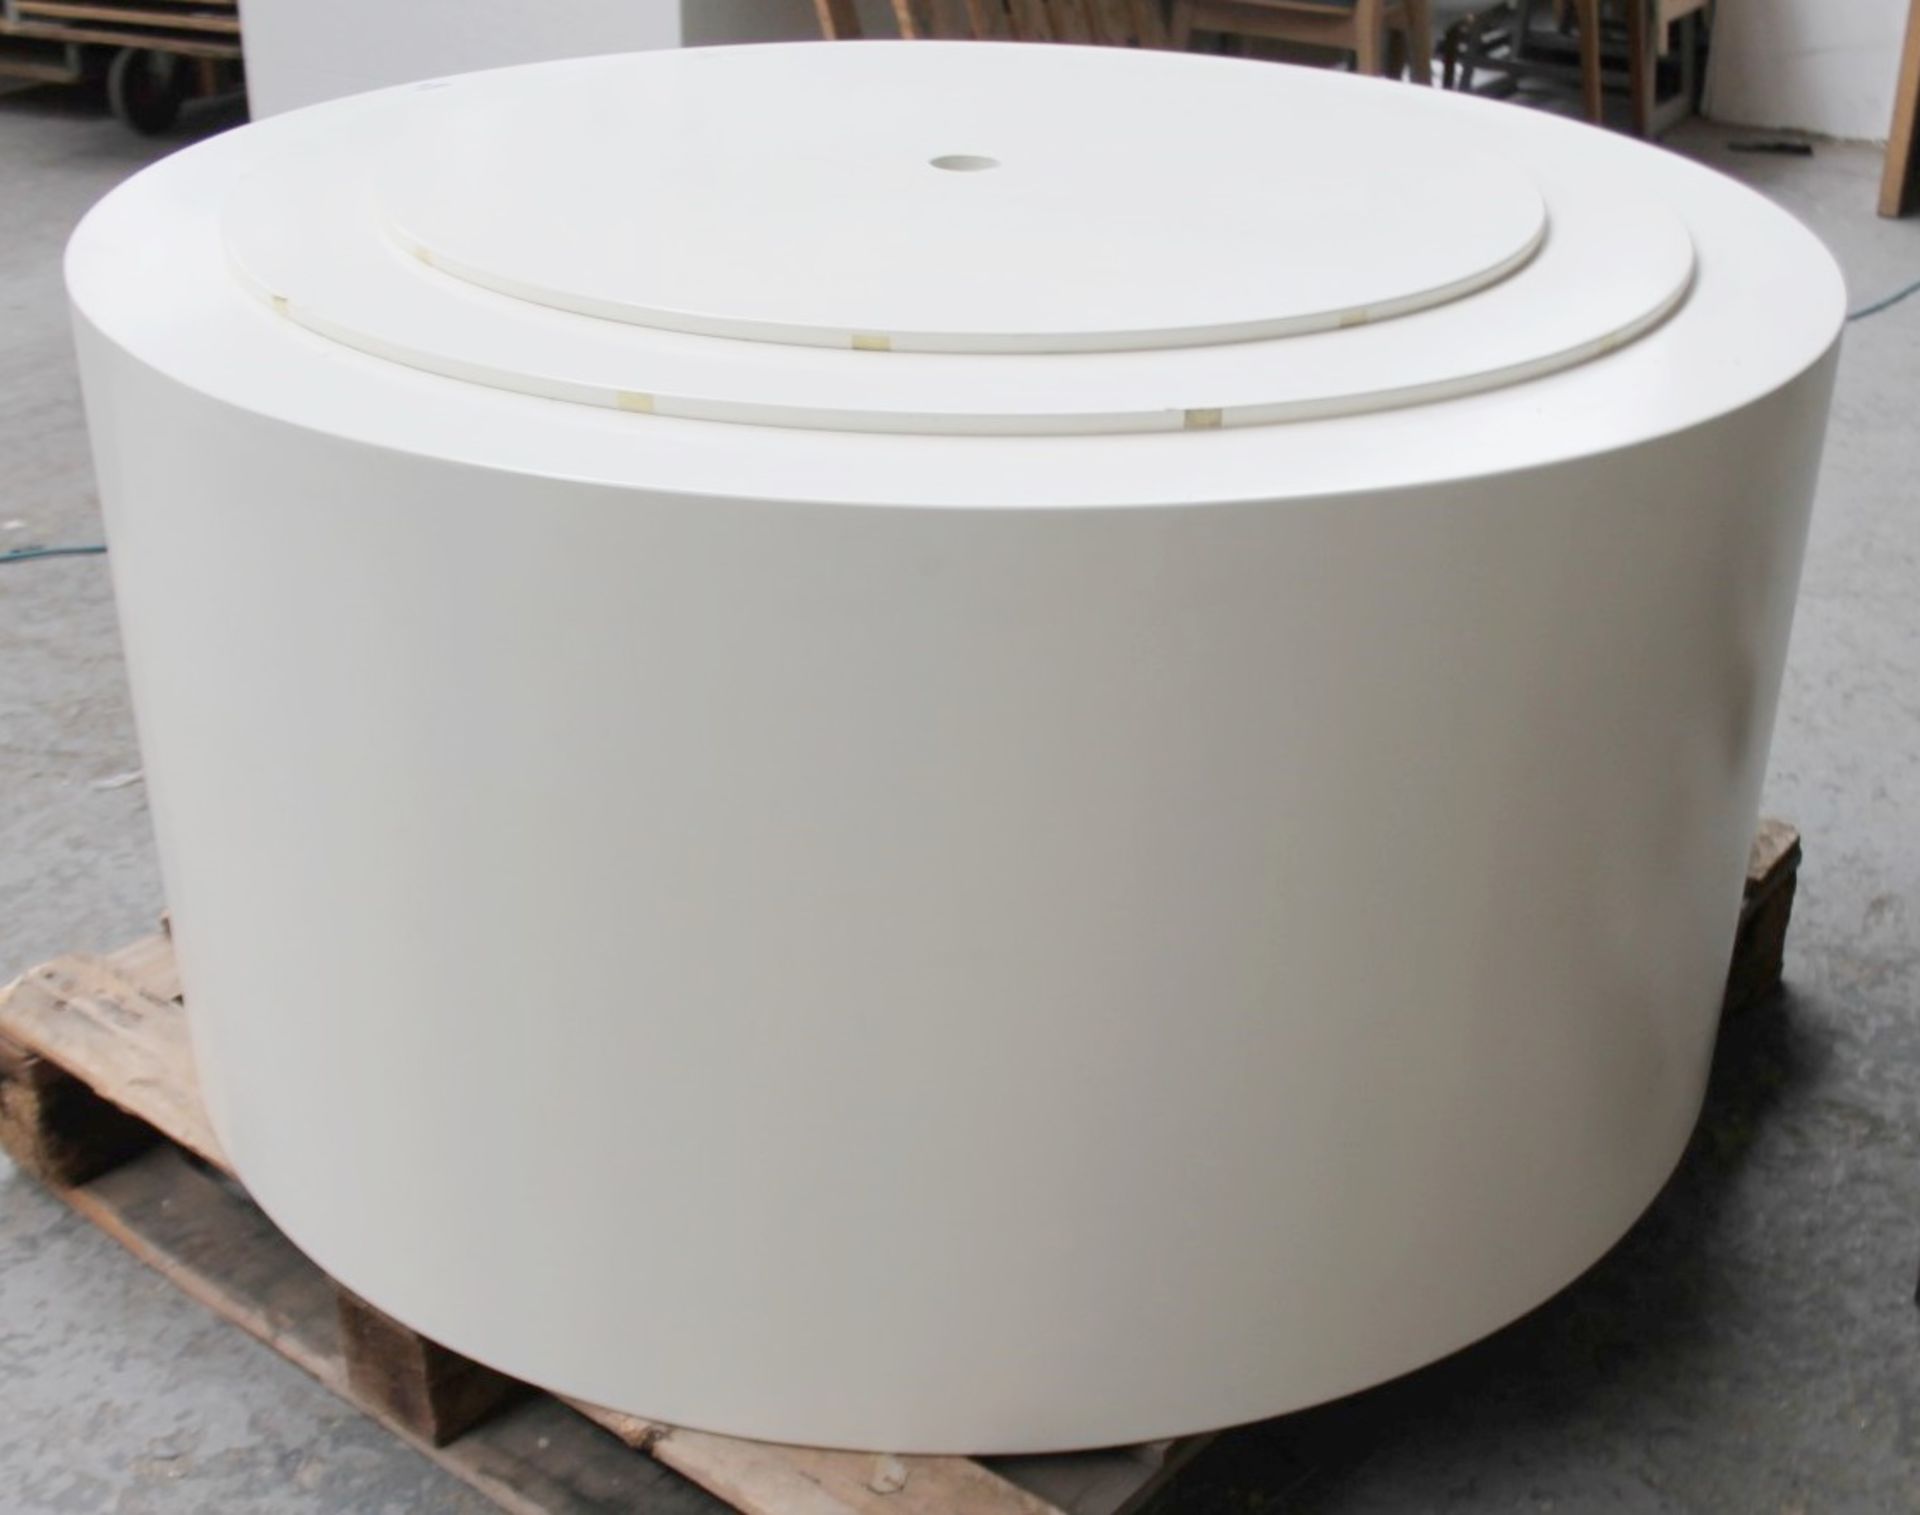 1 x Cylindrical 3-Tier Display Plinth In Cream - £5 Start, No Reserve - Recently Removed From A